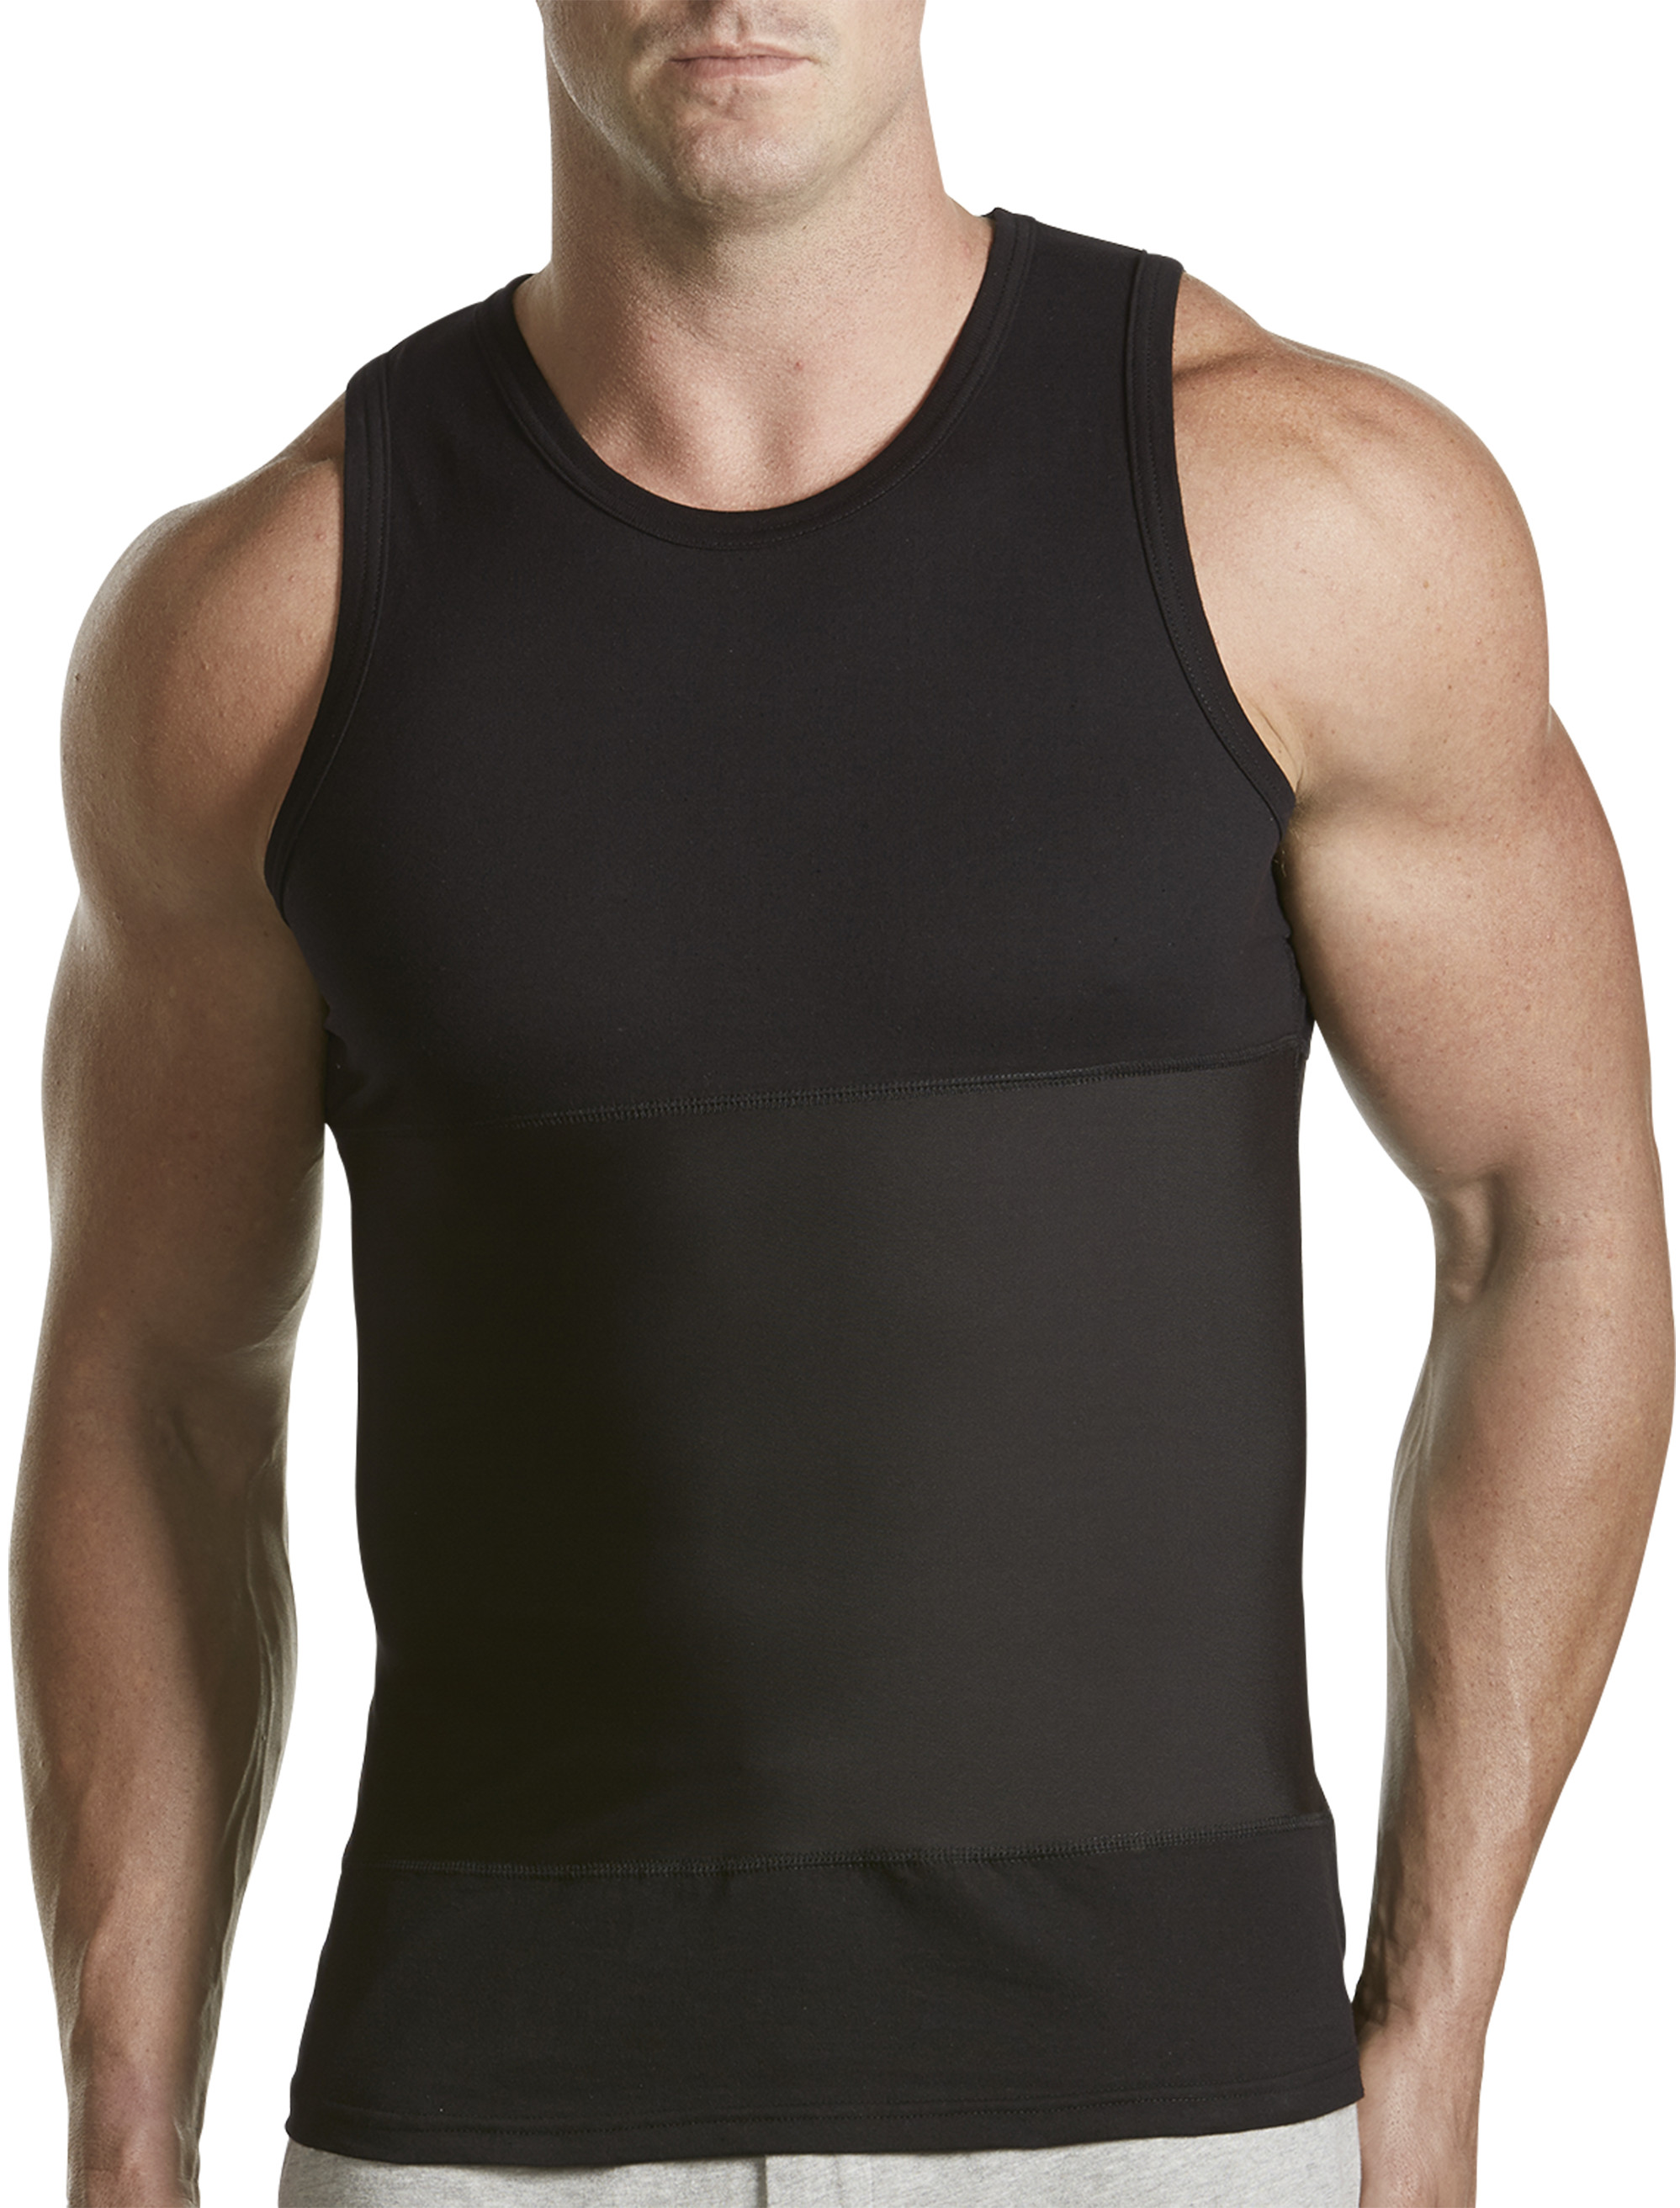 Men Shapewear Slimming Body Shaper Compressed Shirt Tank Top with